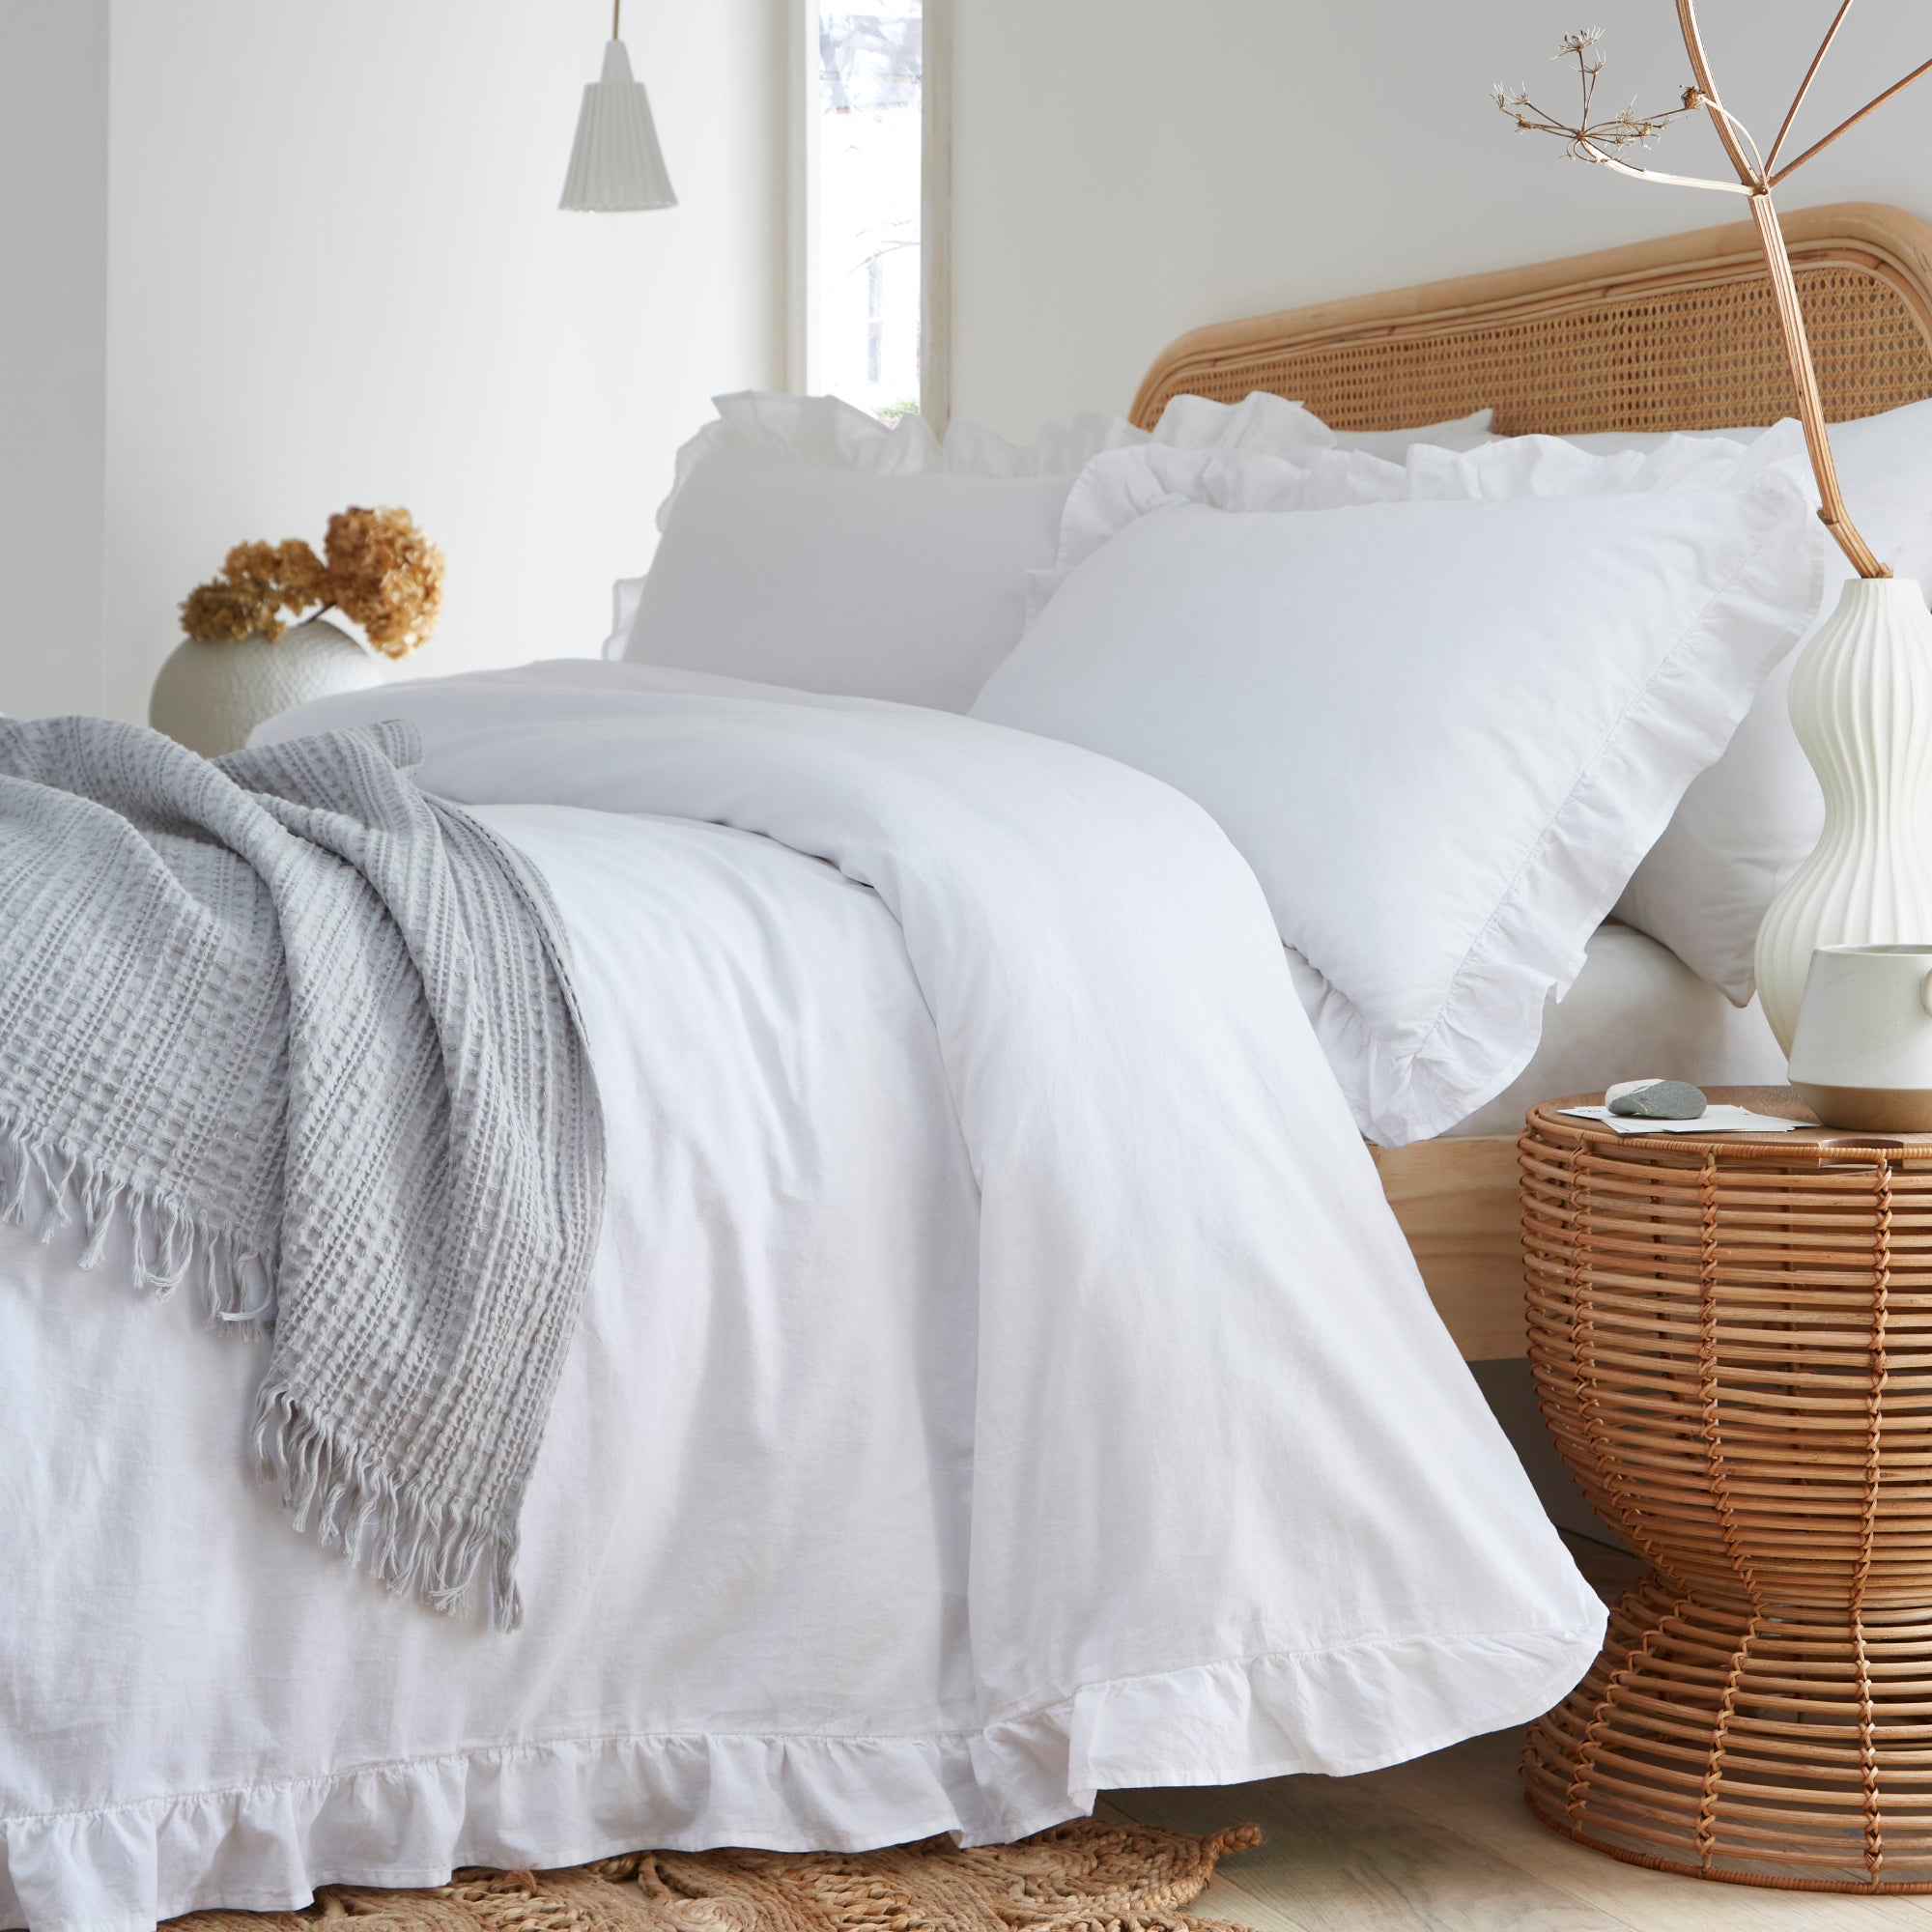 Duvet Cover Set Cassia Frill by Appletree Loft in White